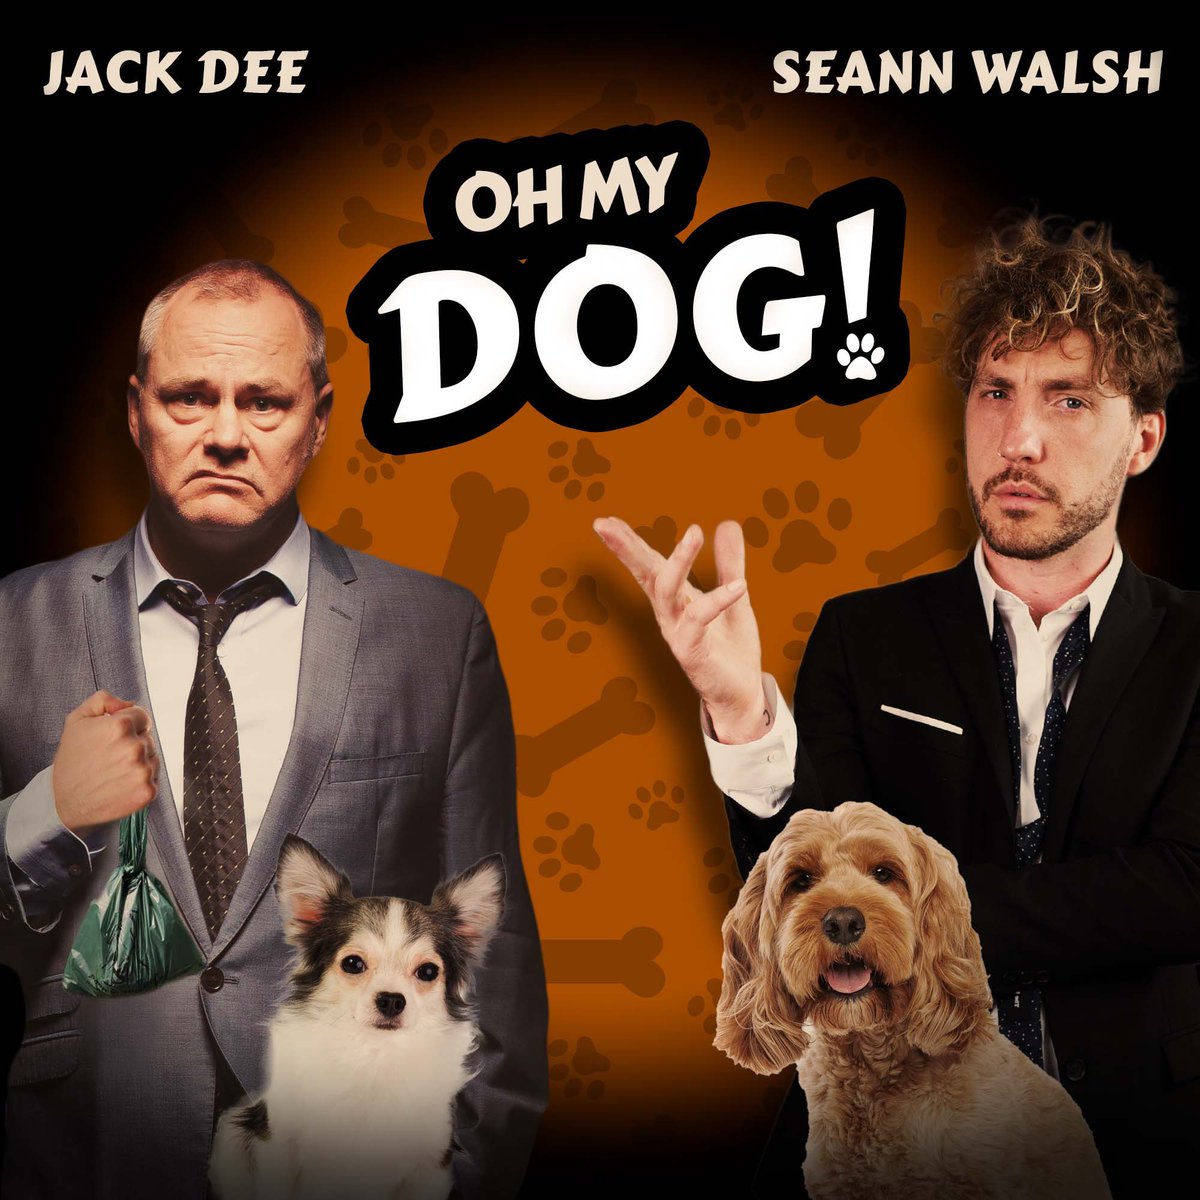 🐶 COMING SOON 🐶 The real reason I’ve agreed to do this is so you can hear the voice Jack uses when he talks to his dog - You will not regret listening.